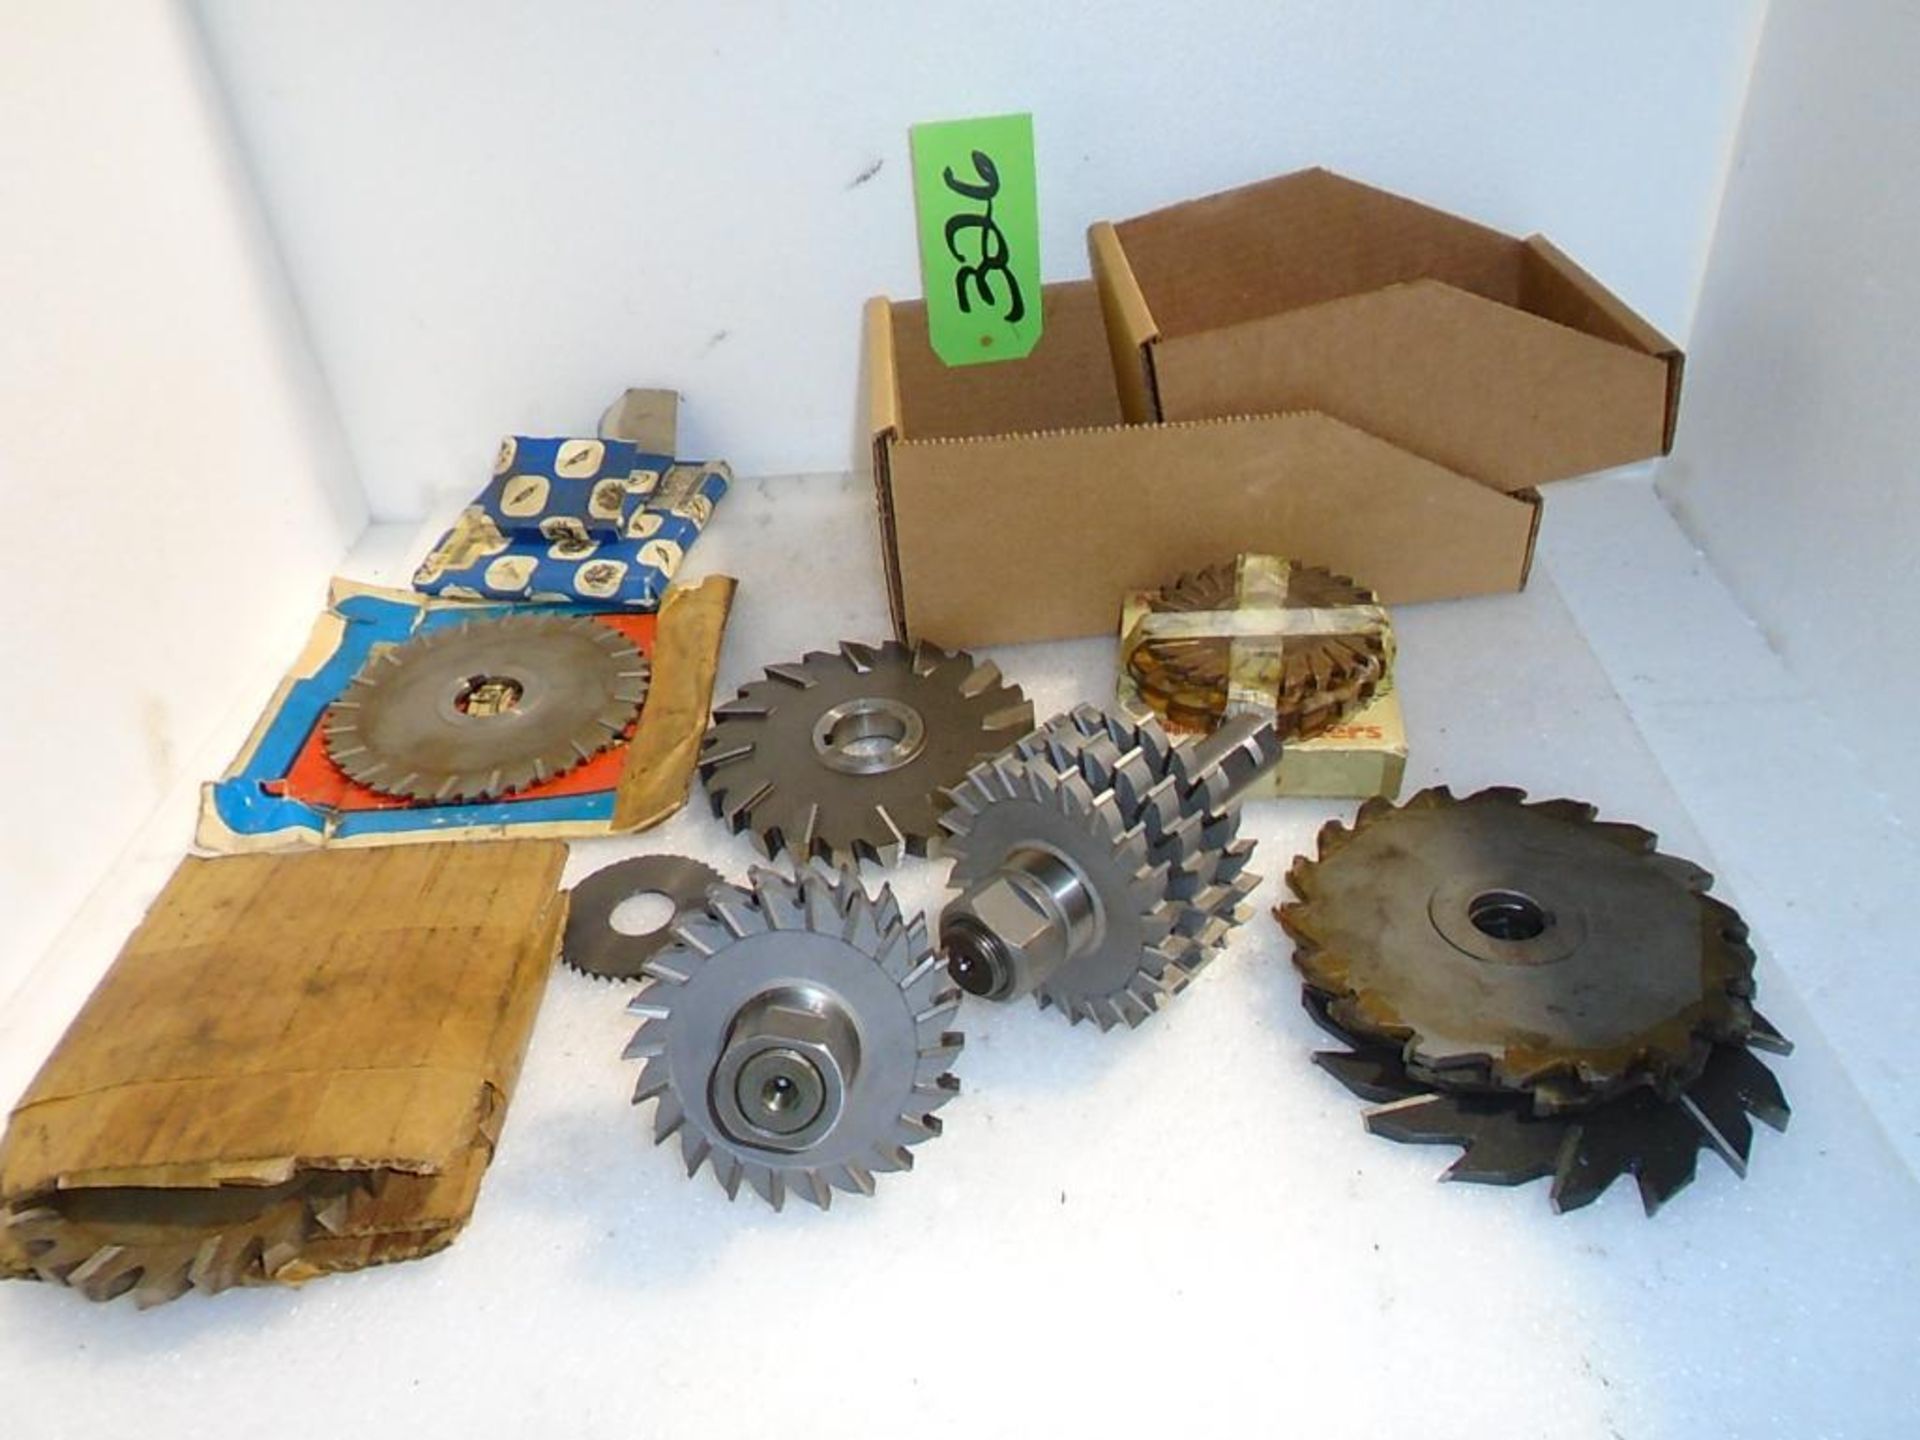 Slitting Saws & Arbors in (2) Boxes